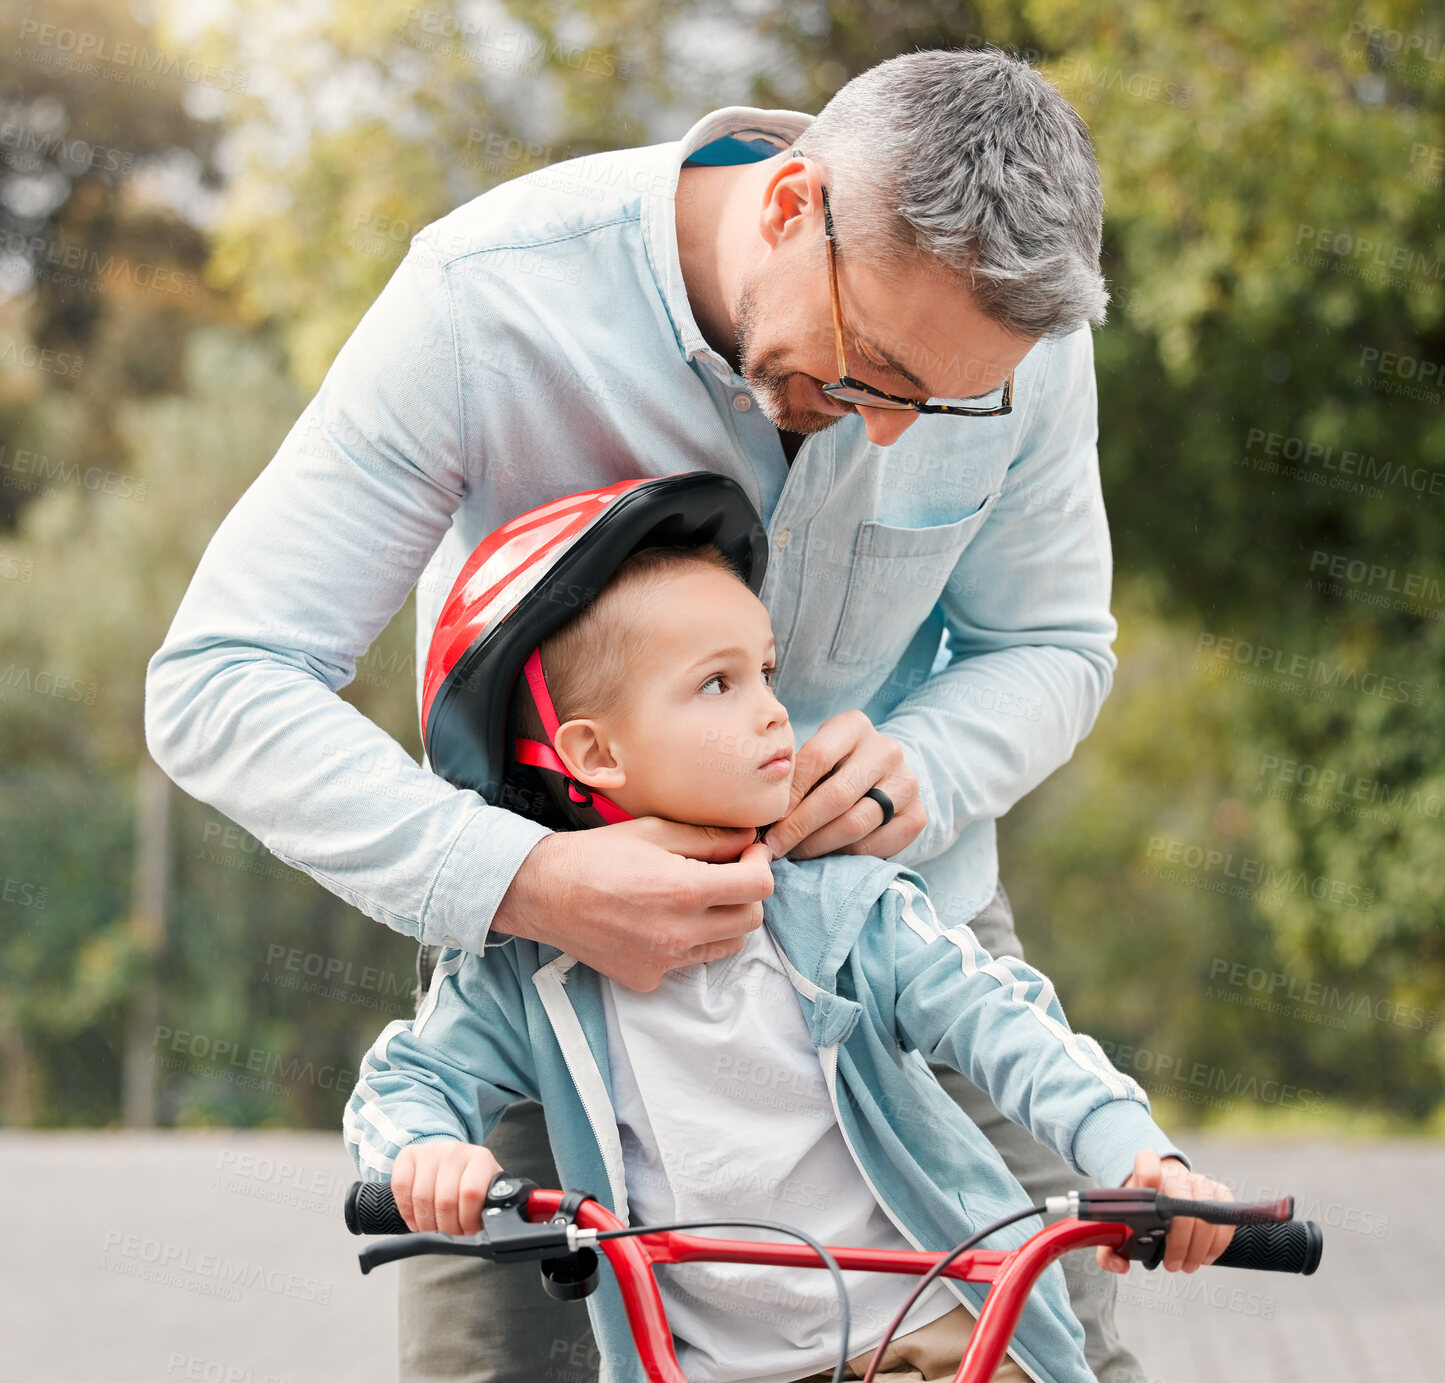 Buy stock photo Shot of a little boy sitting on his bicycle while his dad ties his helmet